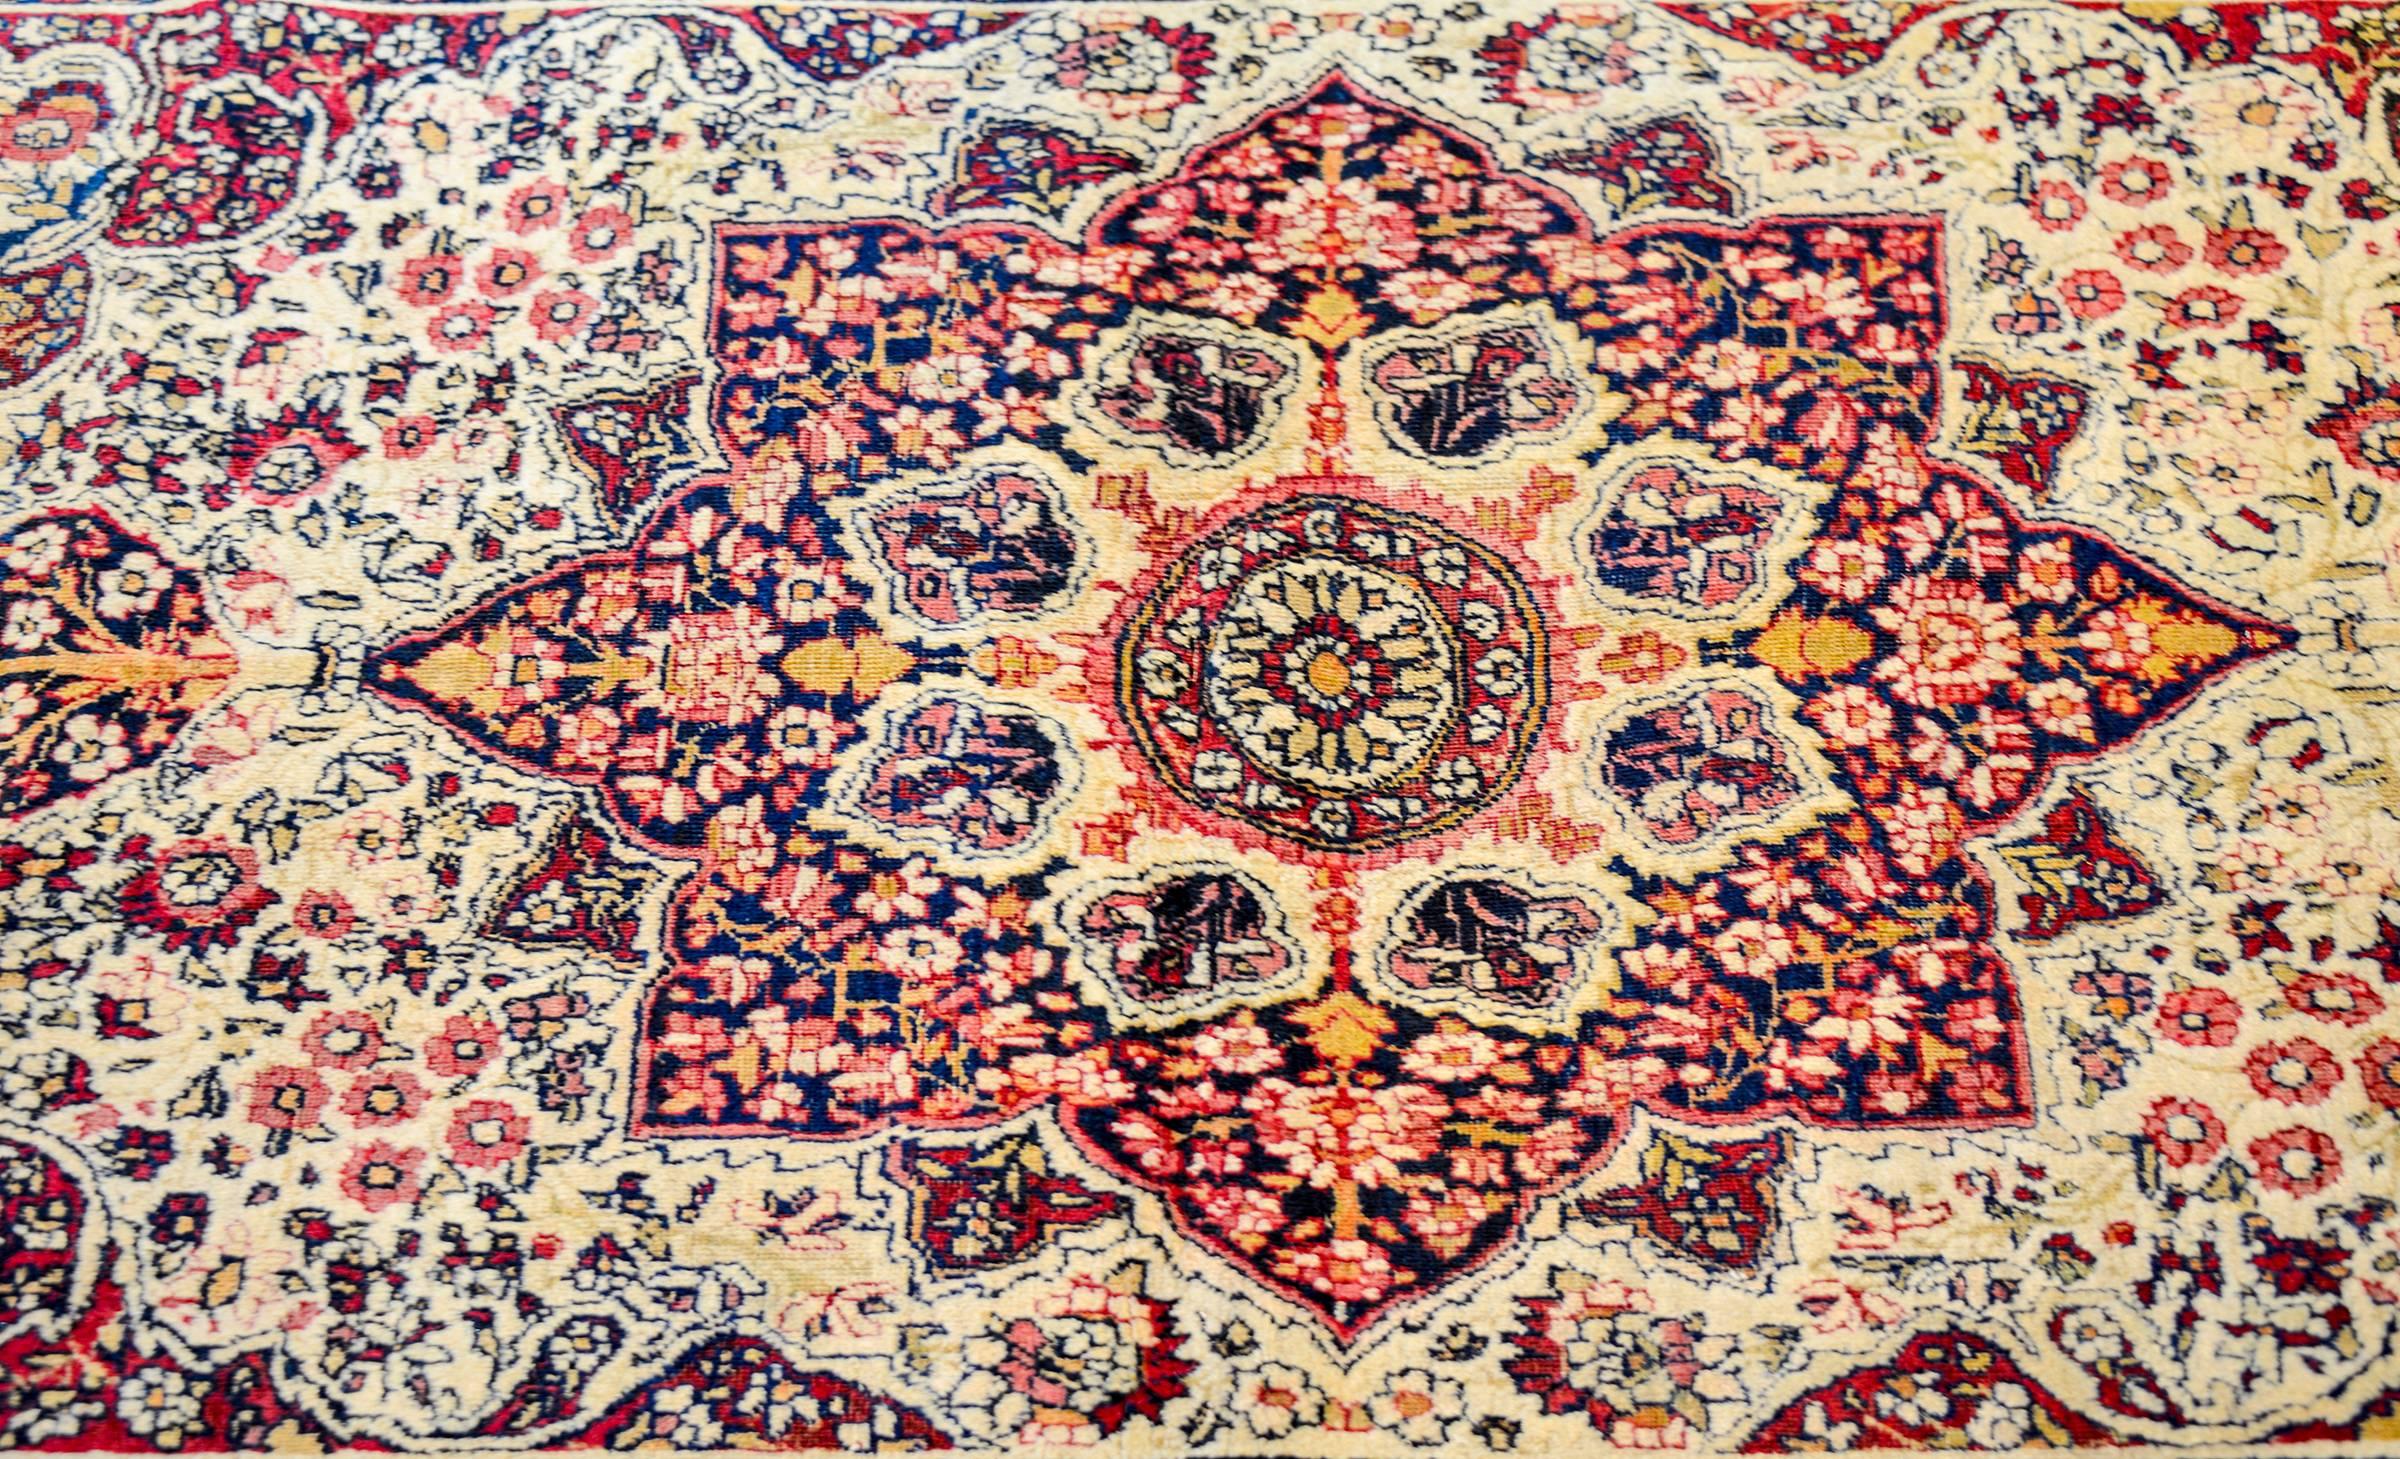 An incredible late 19th century, Persian Lavar Kirman rug with a beautiful central floral medallion amidst a field of intensely woven field of flowers and vines. The border is complex, composed of a wide central floral and vine stripe flanked by two